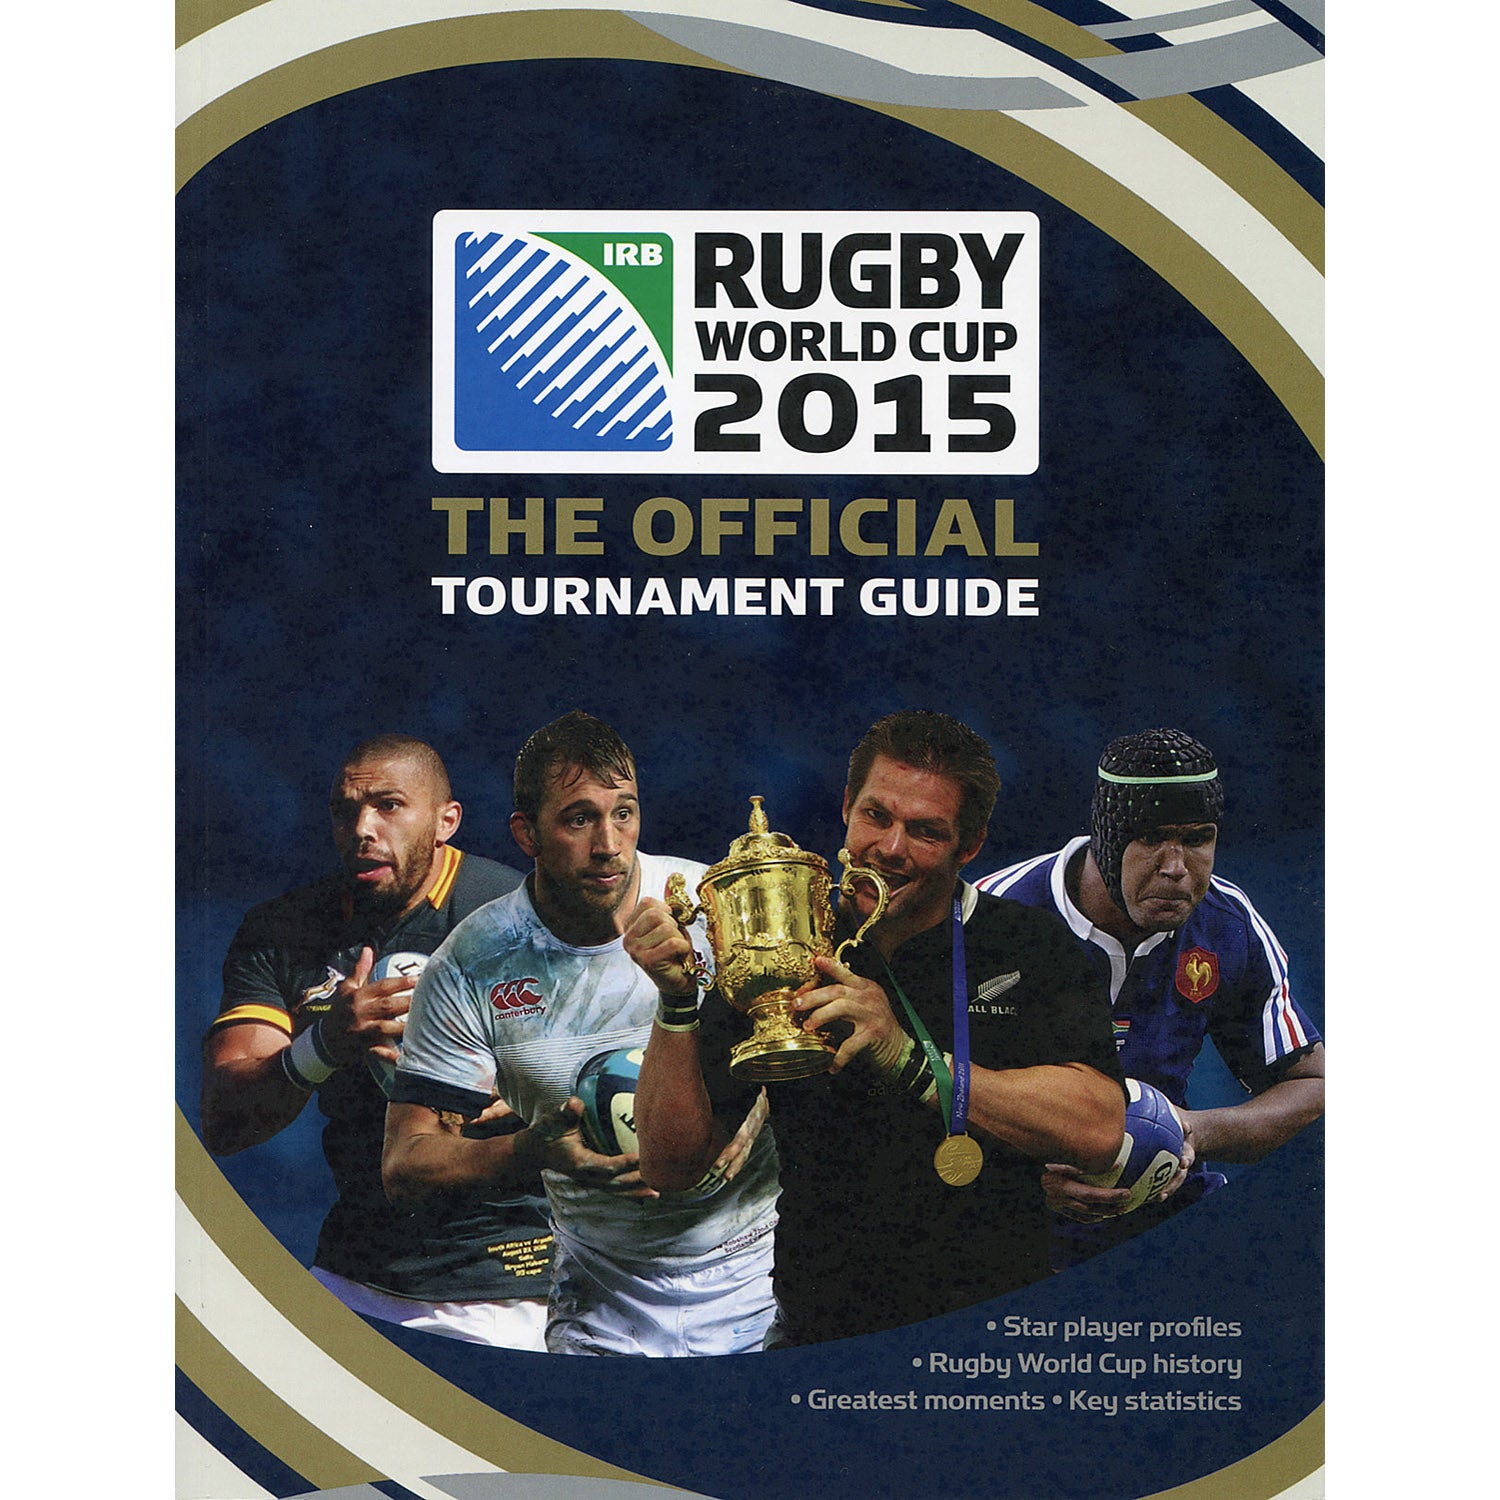 Rugby World Cup 2015 – The Official Tournament Guide